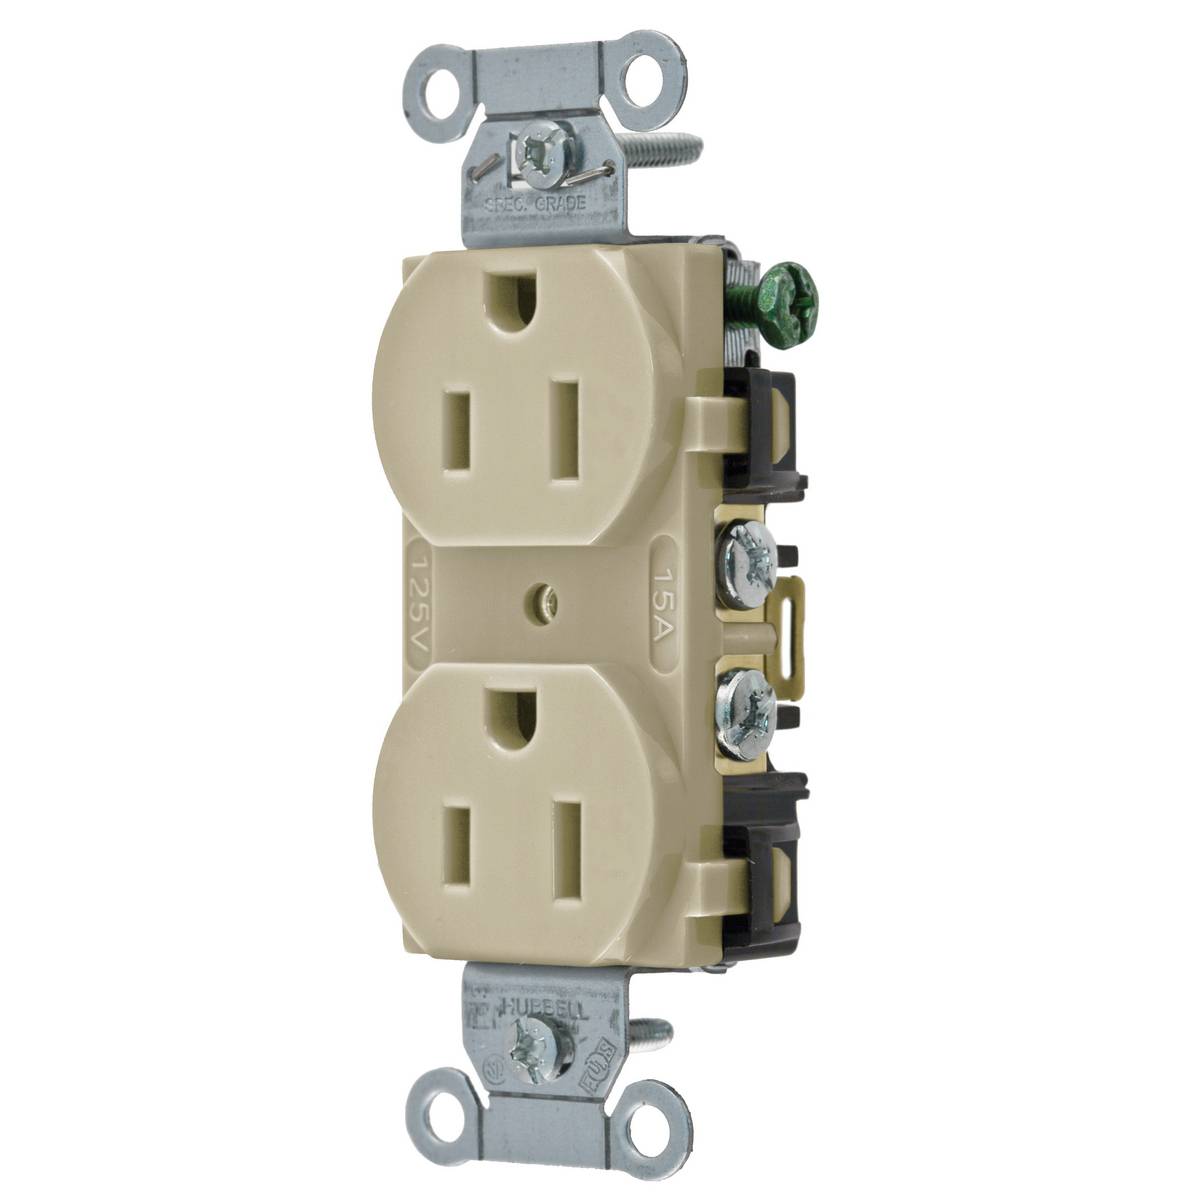 Wiring Device-Kellems BR15I 1-Phase Duplex Self-Grounding Standard Traditional Screw Mount Straight Blade Receptacle, 125 VAC, 15 A, 2 Poles, 3 Wires, Ivory